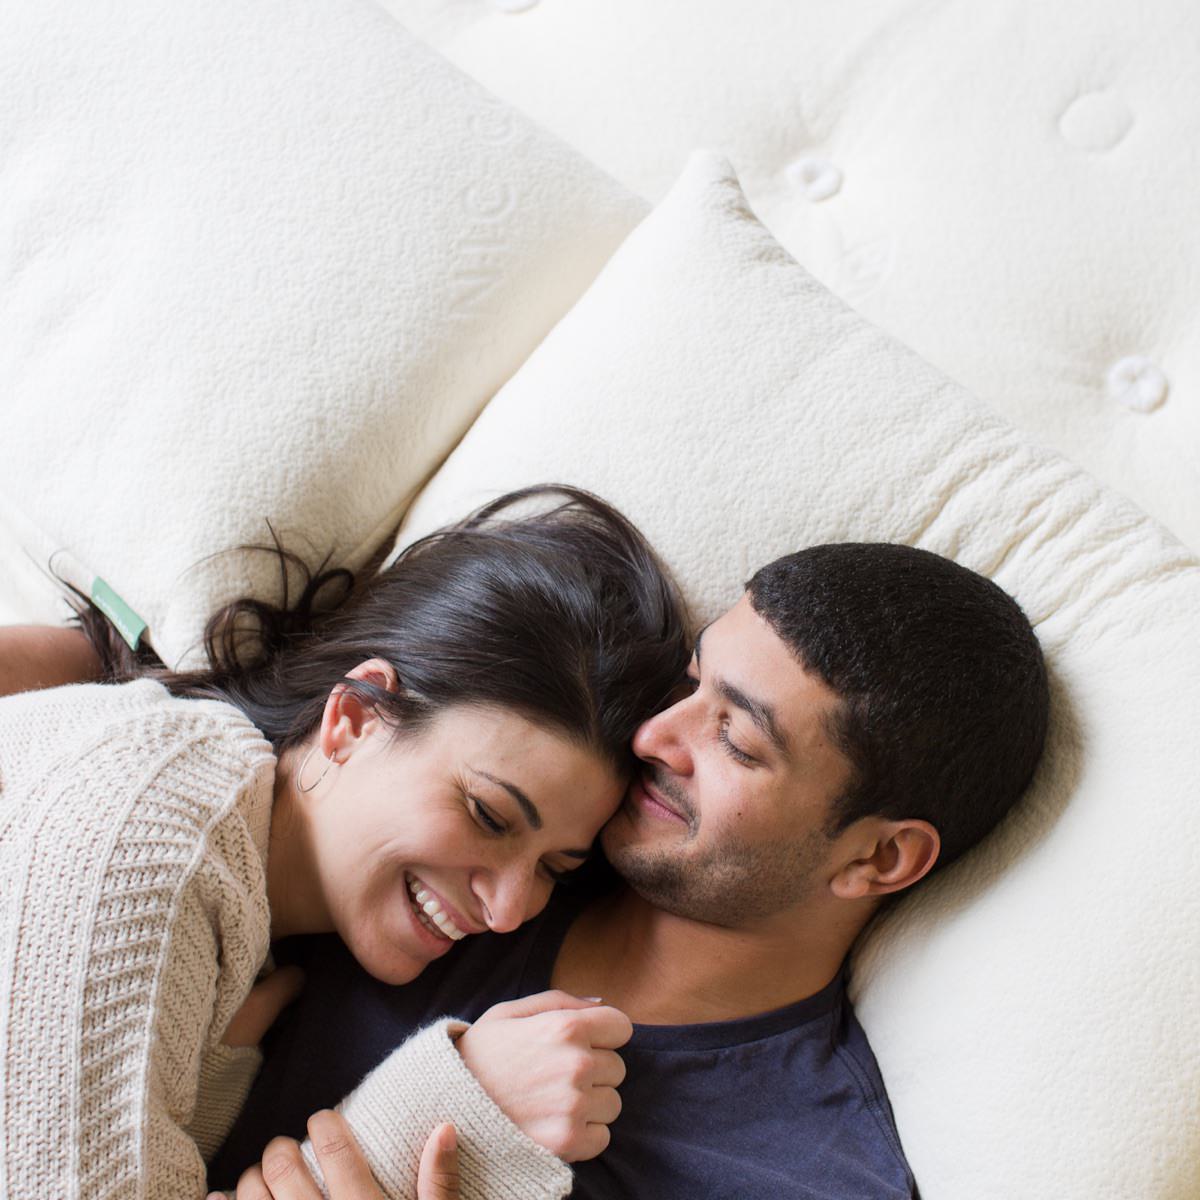 Avocado Green Mattress is the best natural and organic mattress for couples and motion isolation